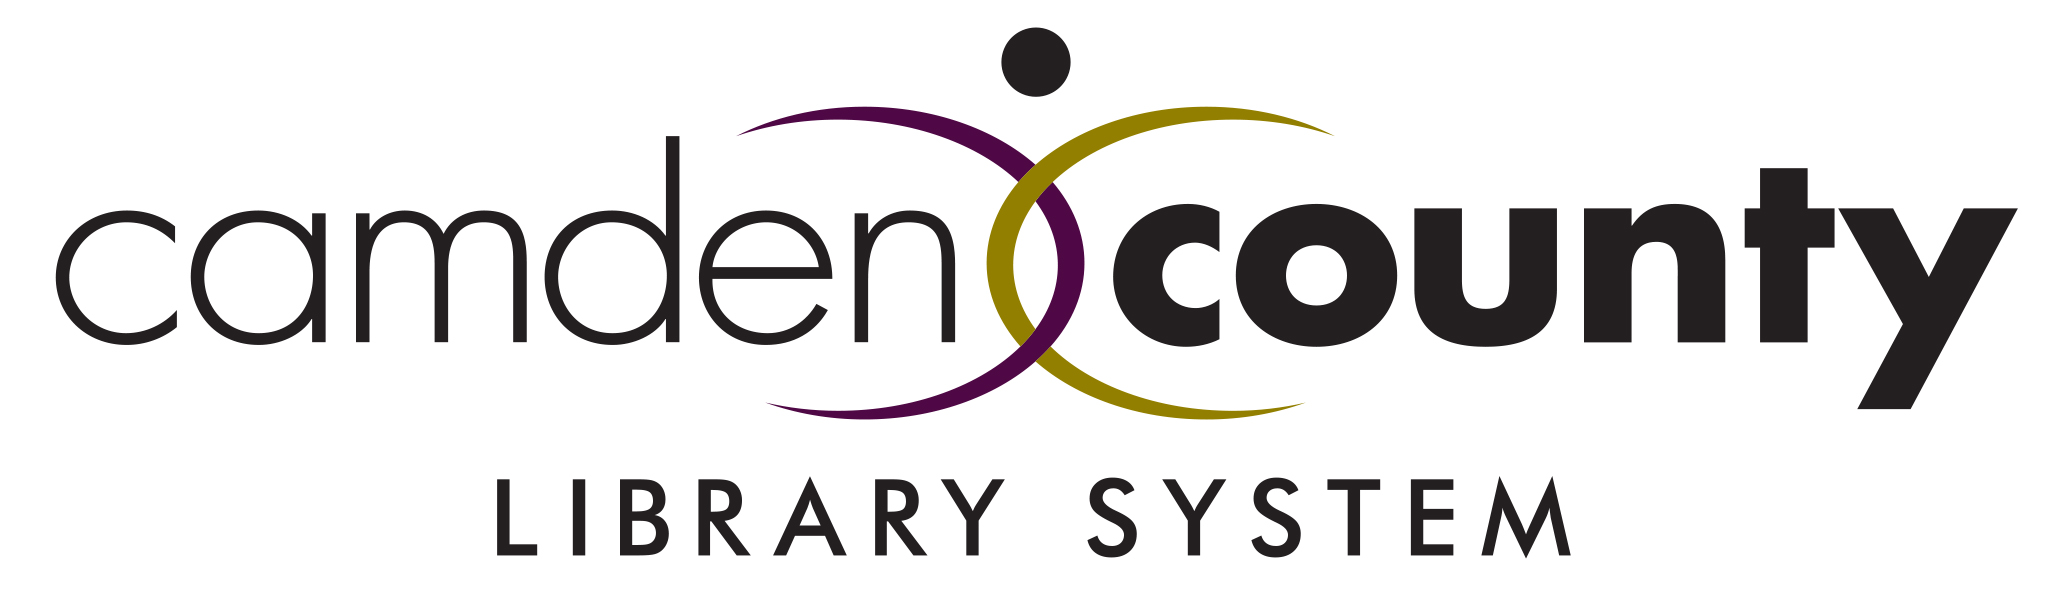 Camden County Library System Events and Rooms logo